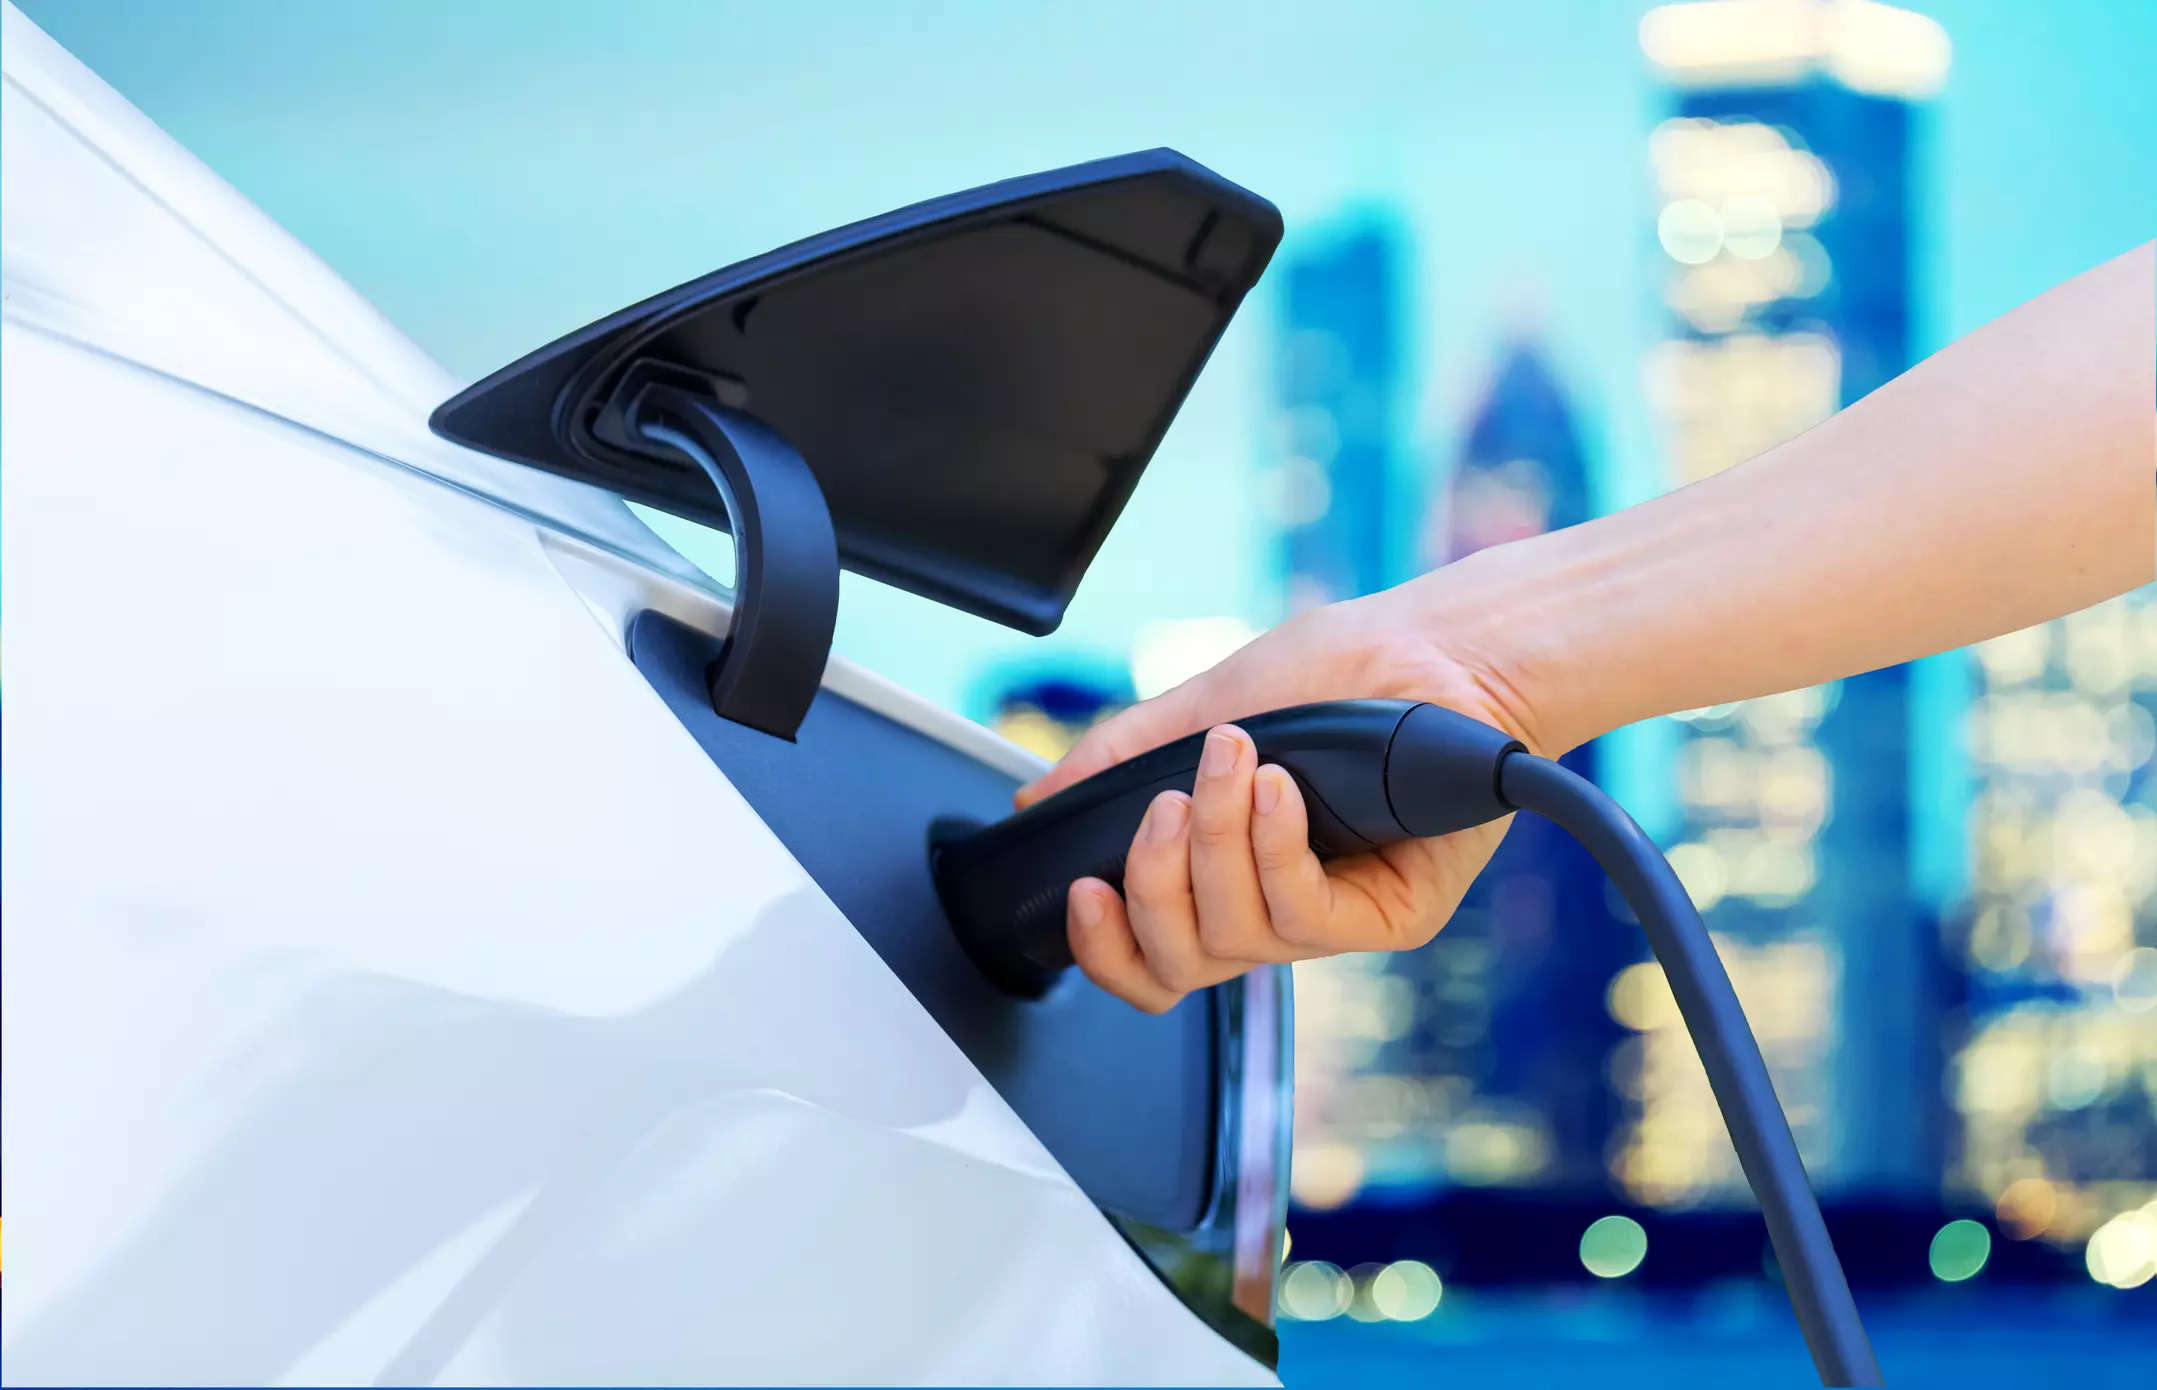  The industry body has also recommended that 25 per cent Parking Space be earmarked and given on long term lease against revenue sharing by Municipal Corporations for Electric Vehicle (EV) Charging infrastructure.